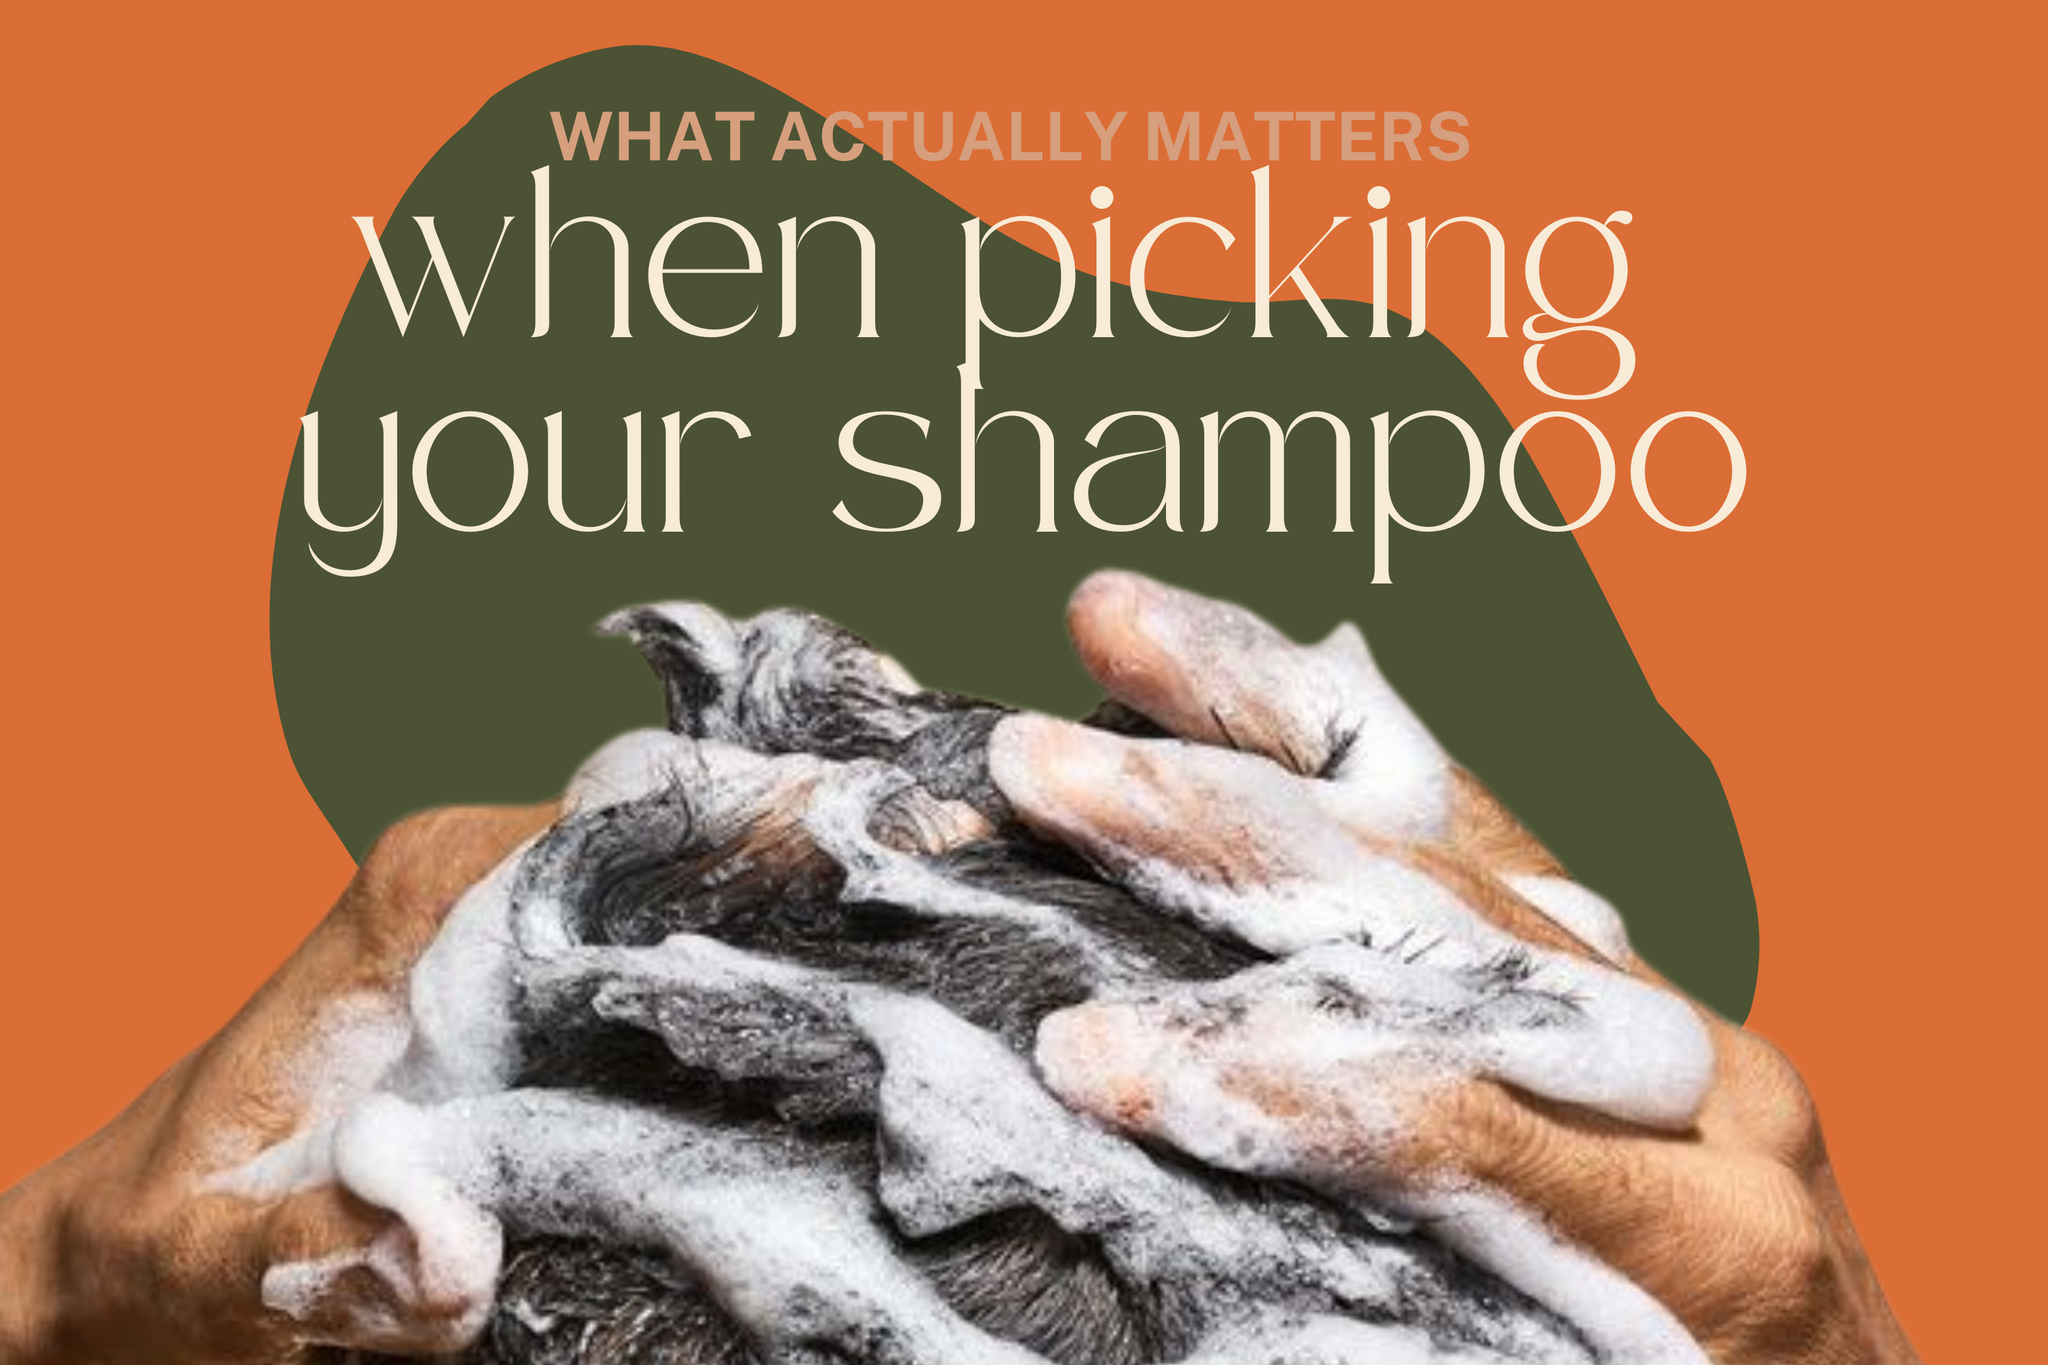 No, Gender Doesn't Matter When Picking the Right Shampoo